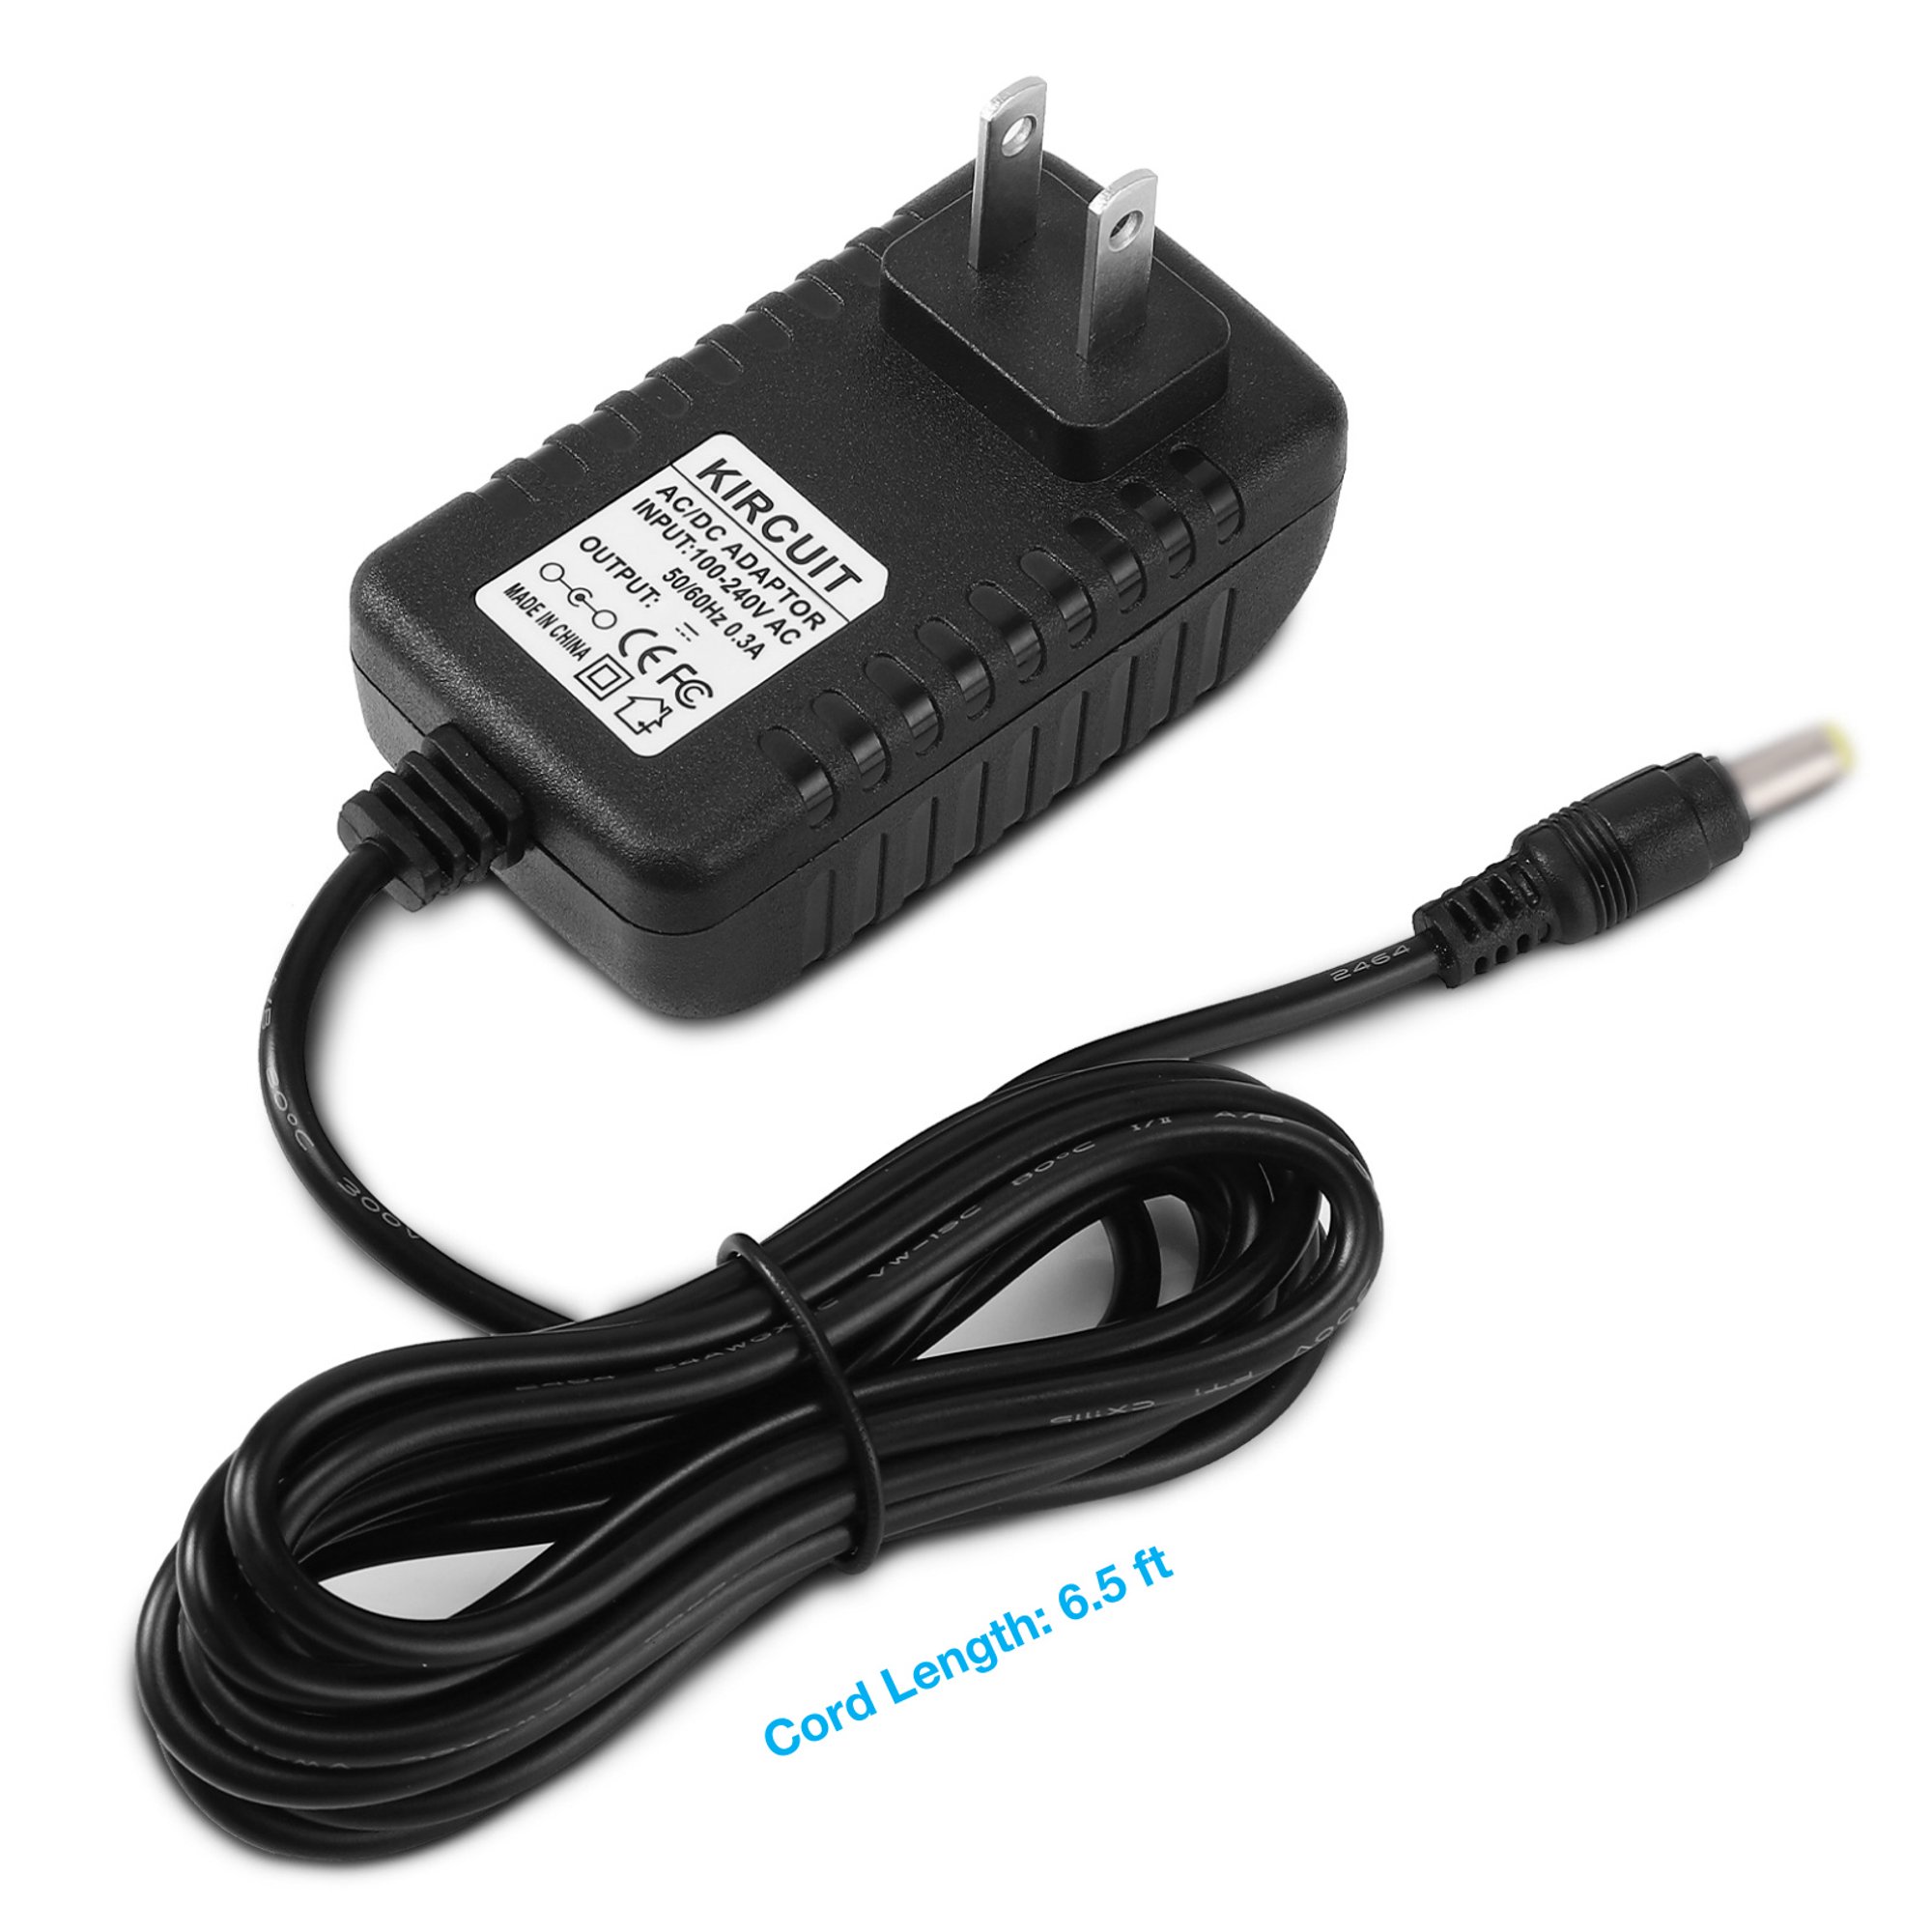 Kircuit 12V AC/DC Adapter Compatible with Roland ACO-120T Model: A41210T Boss Electric Piano Keyboard Class 2 Transformer 12VDC DC12V 12.0V 12 Volts Power Supply Cord Home Wall Charger PSU - image 3 of 4